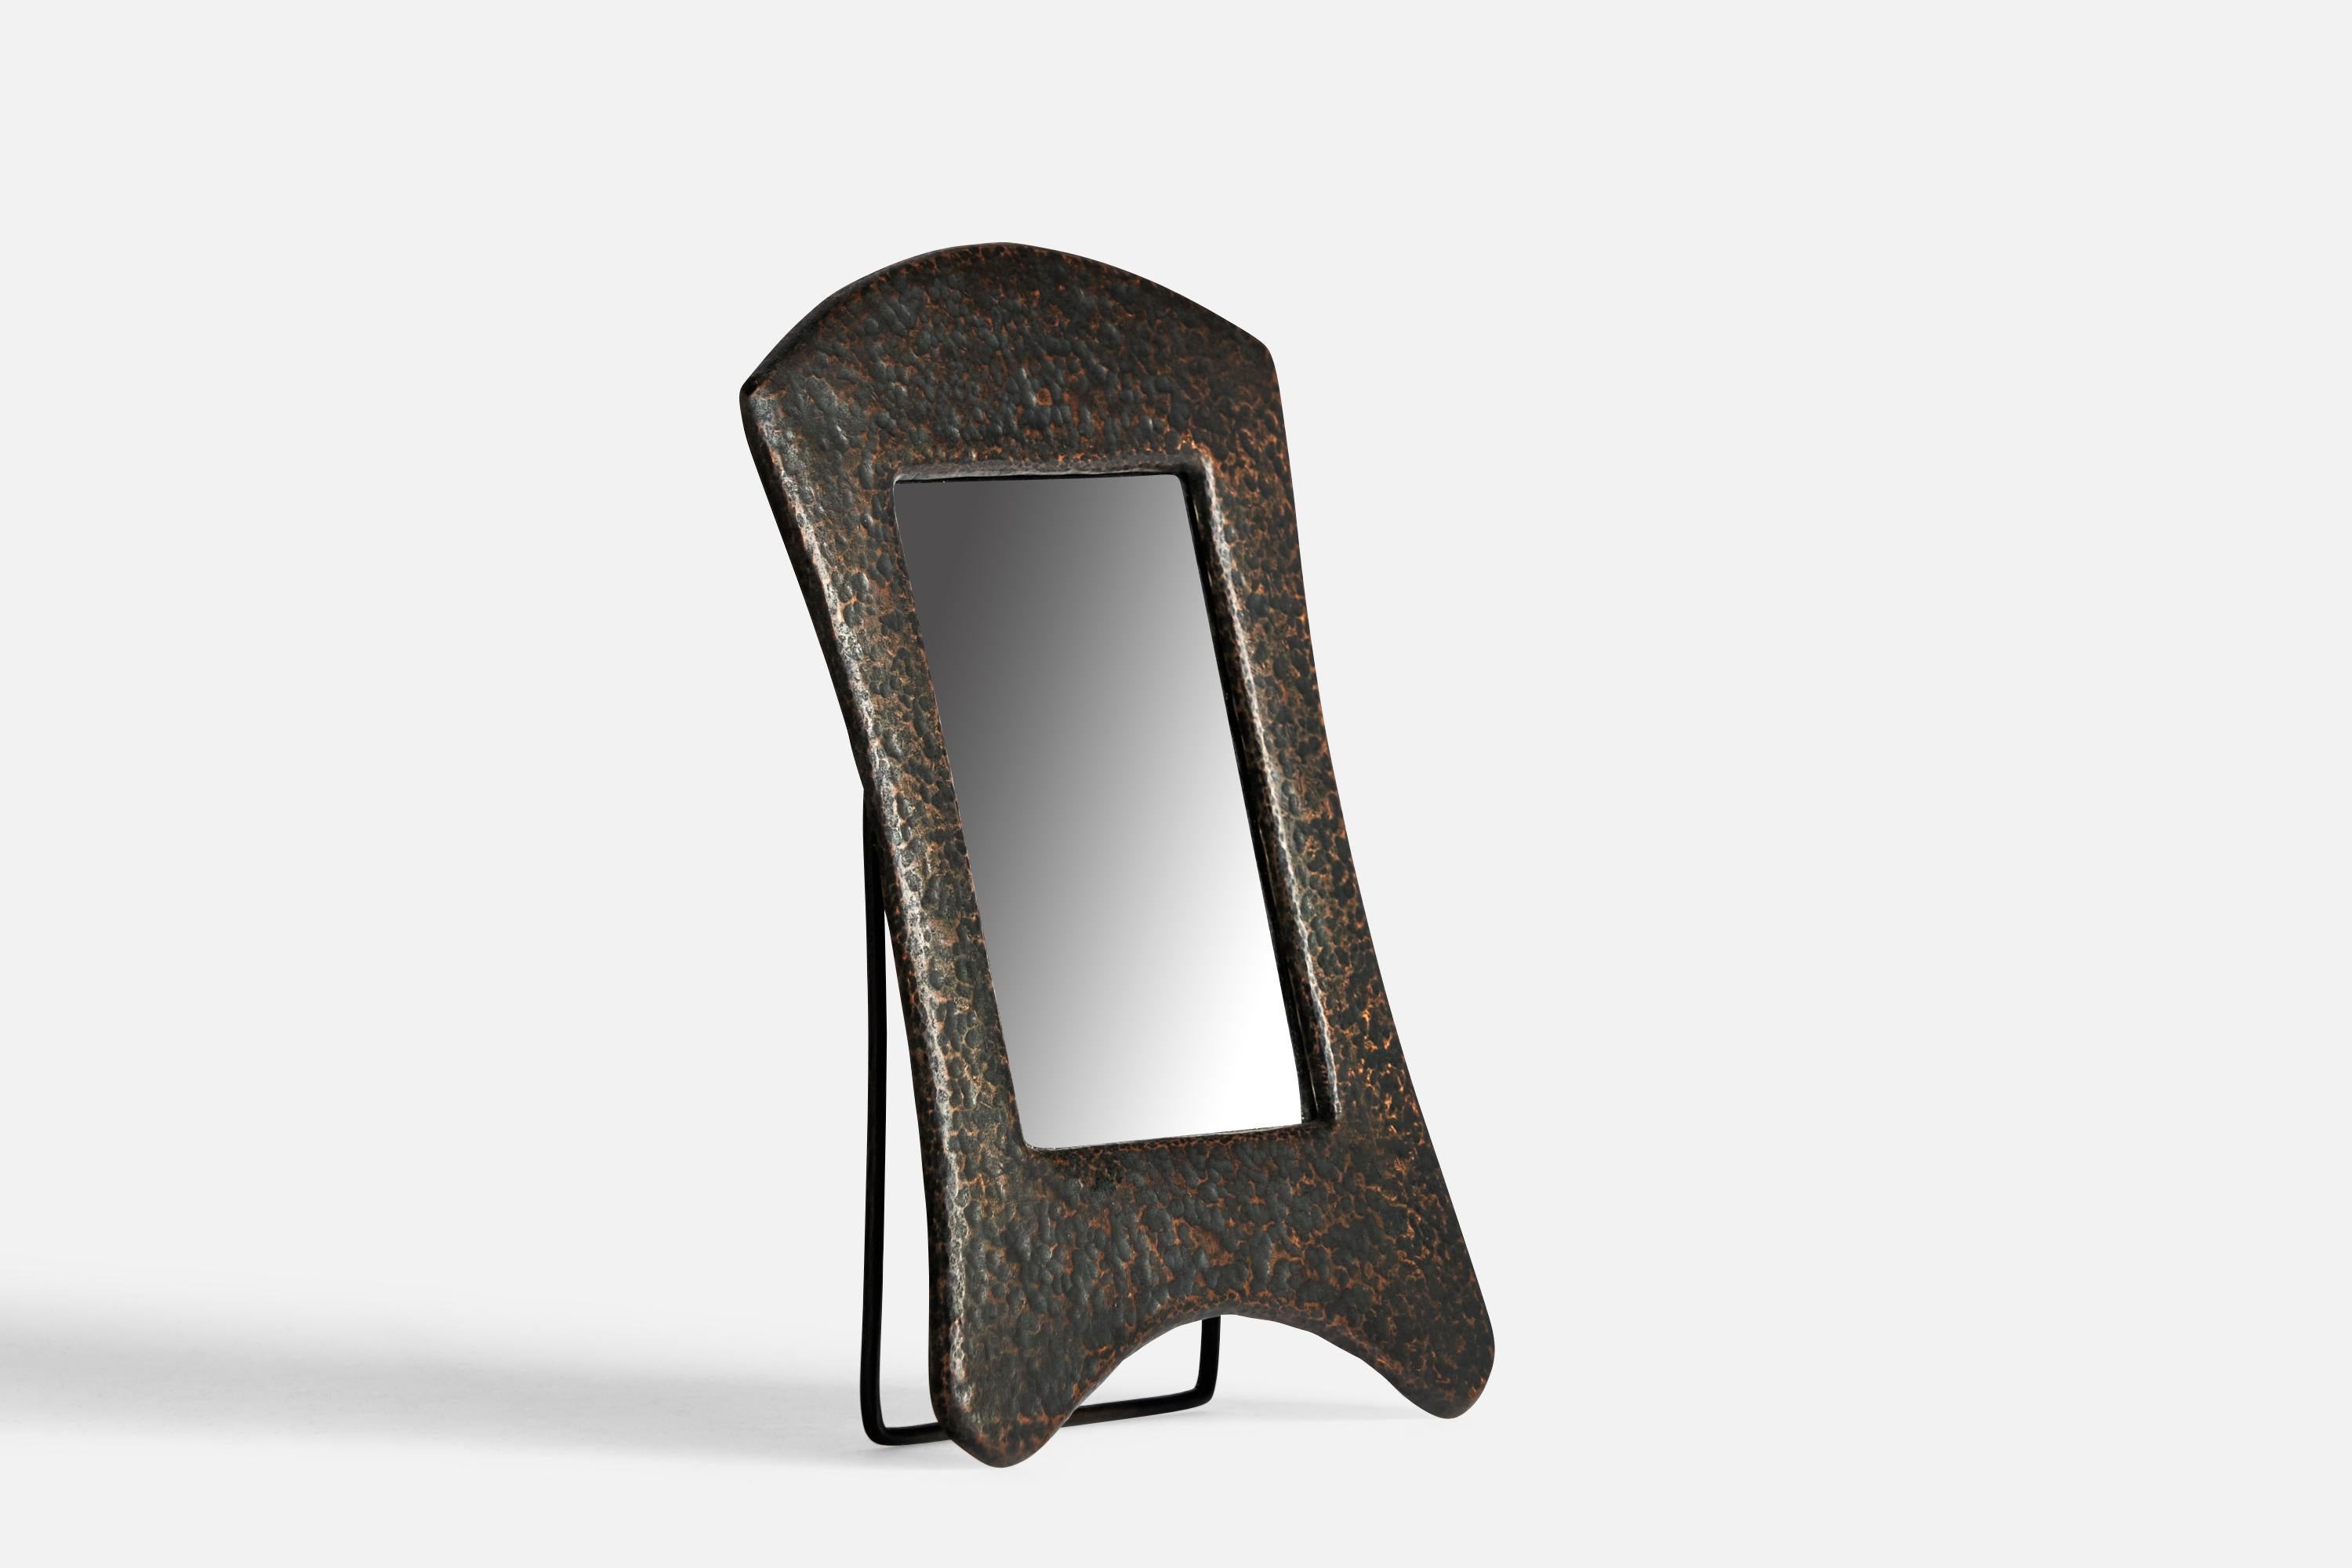 A hammered and darkened copper mirror designed and produced in Sweden, c. 1920s.